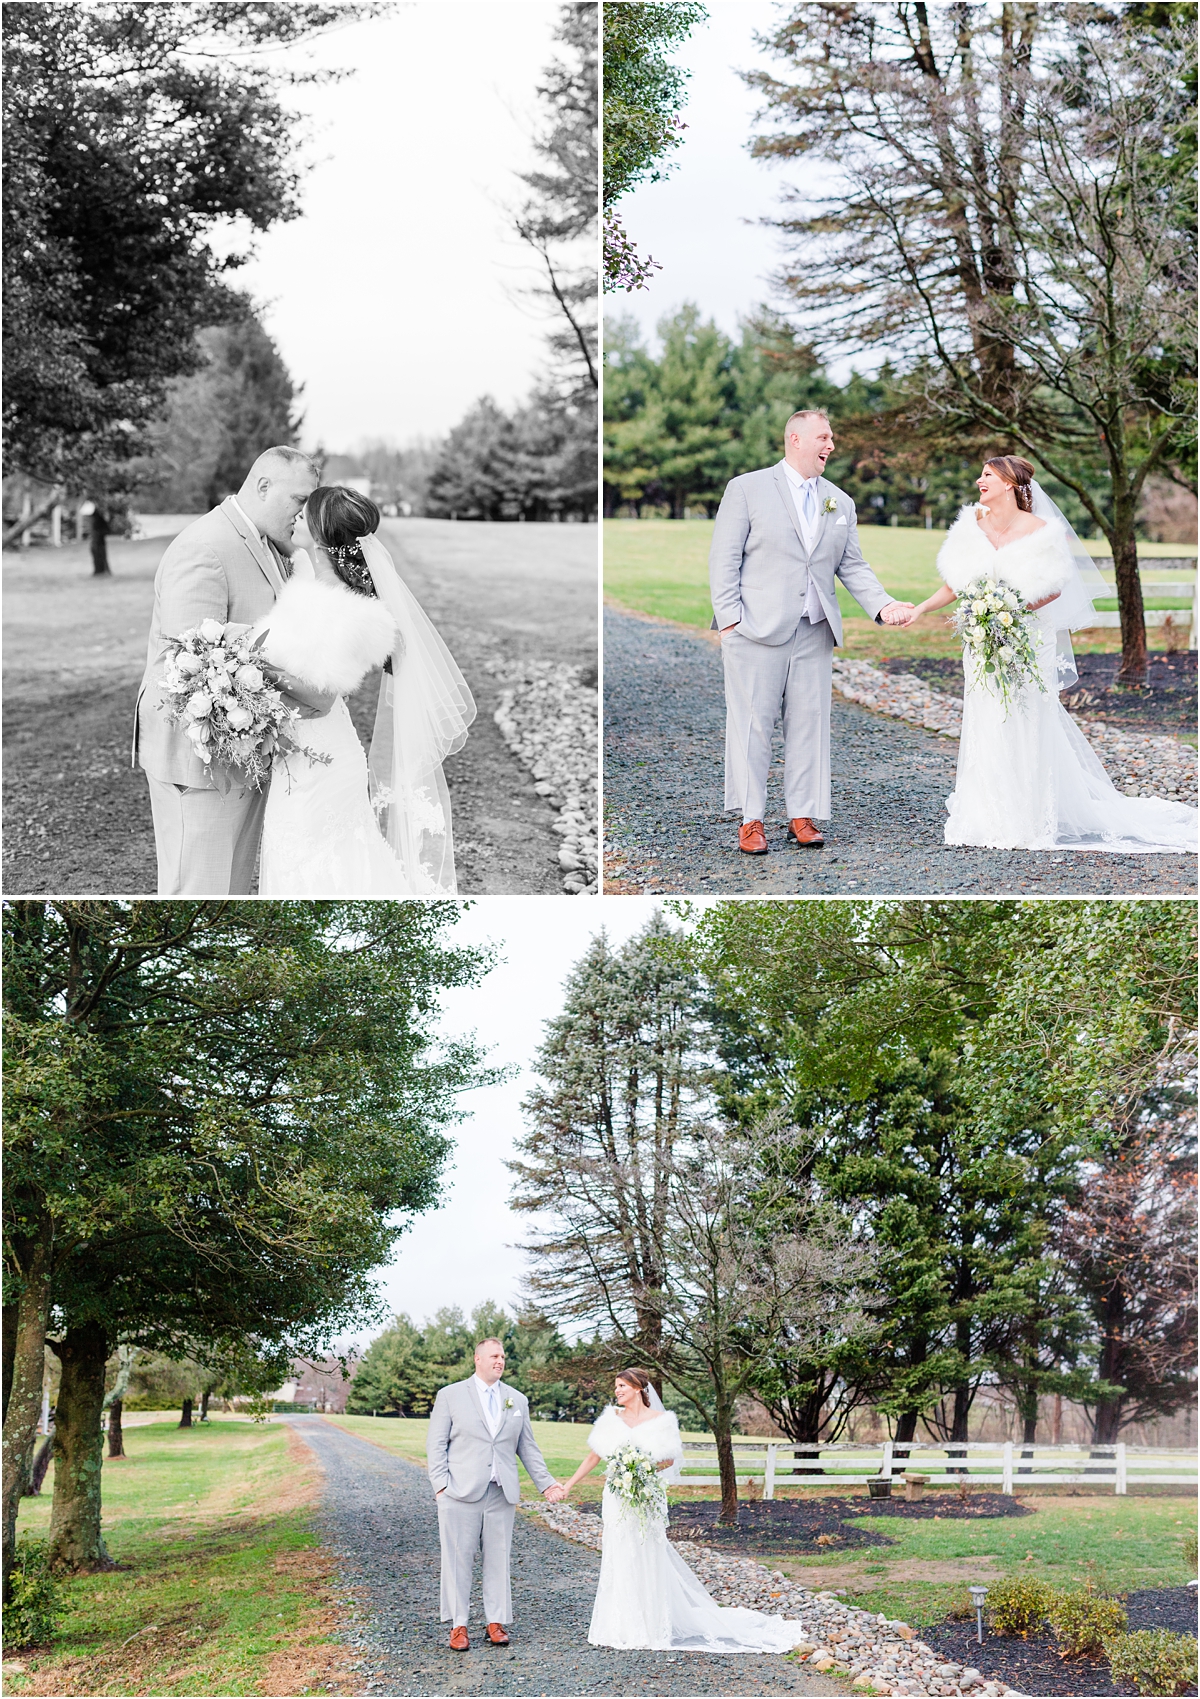 Rosewood Farms Wedding photographed by MD wedding photographer Alexandra Mandato Photography